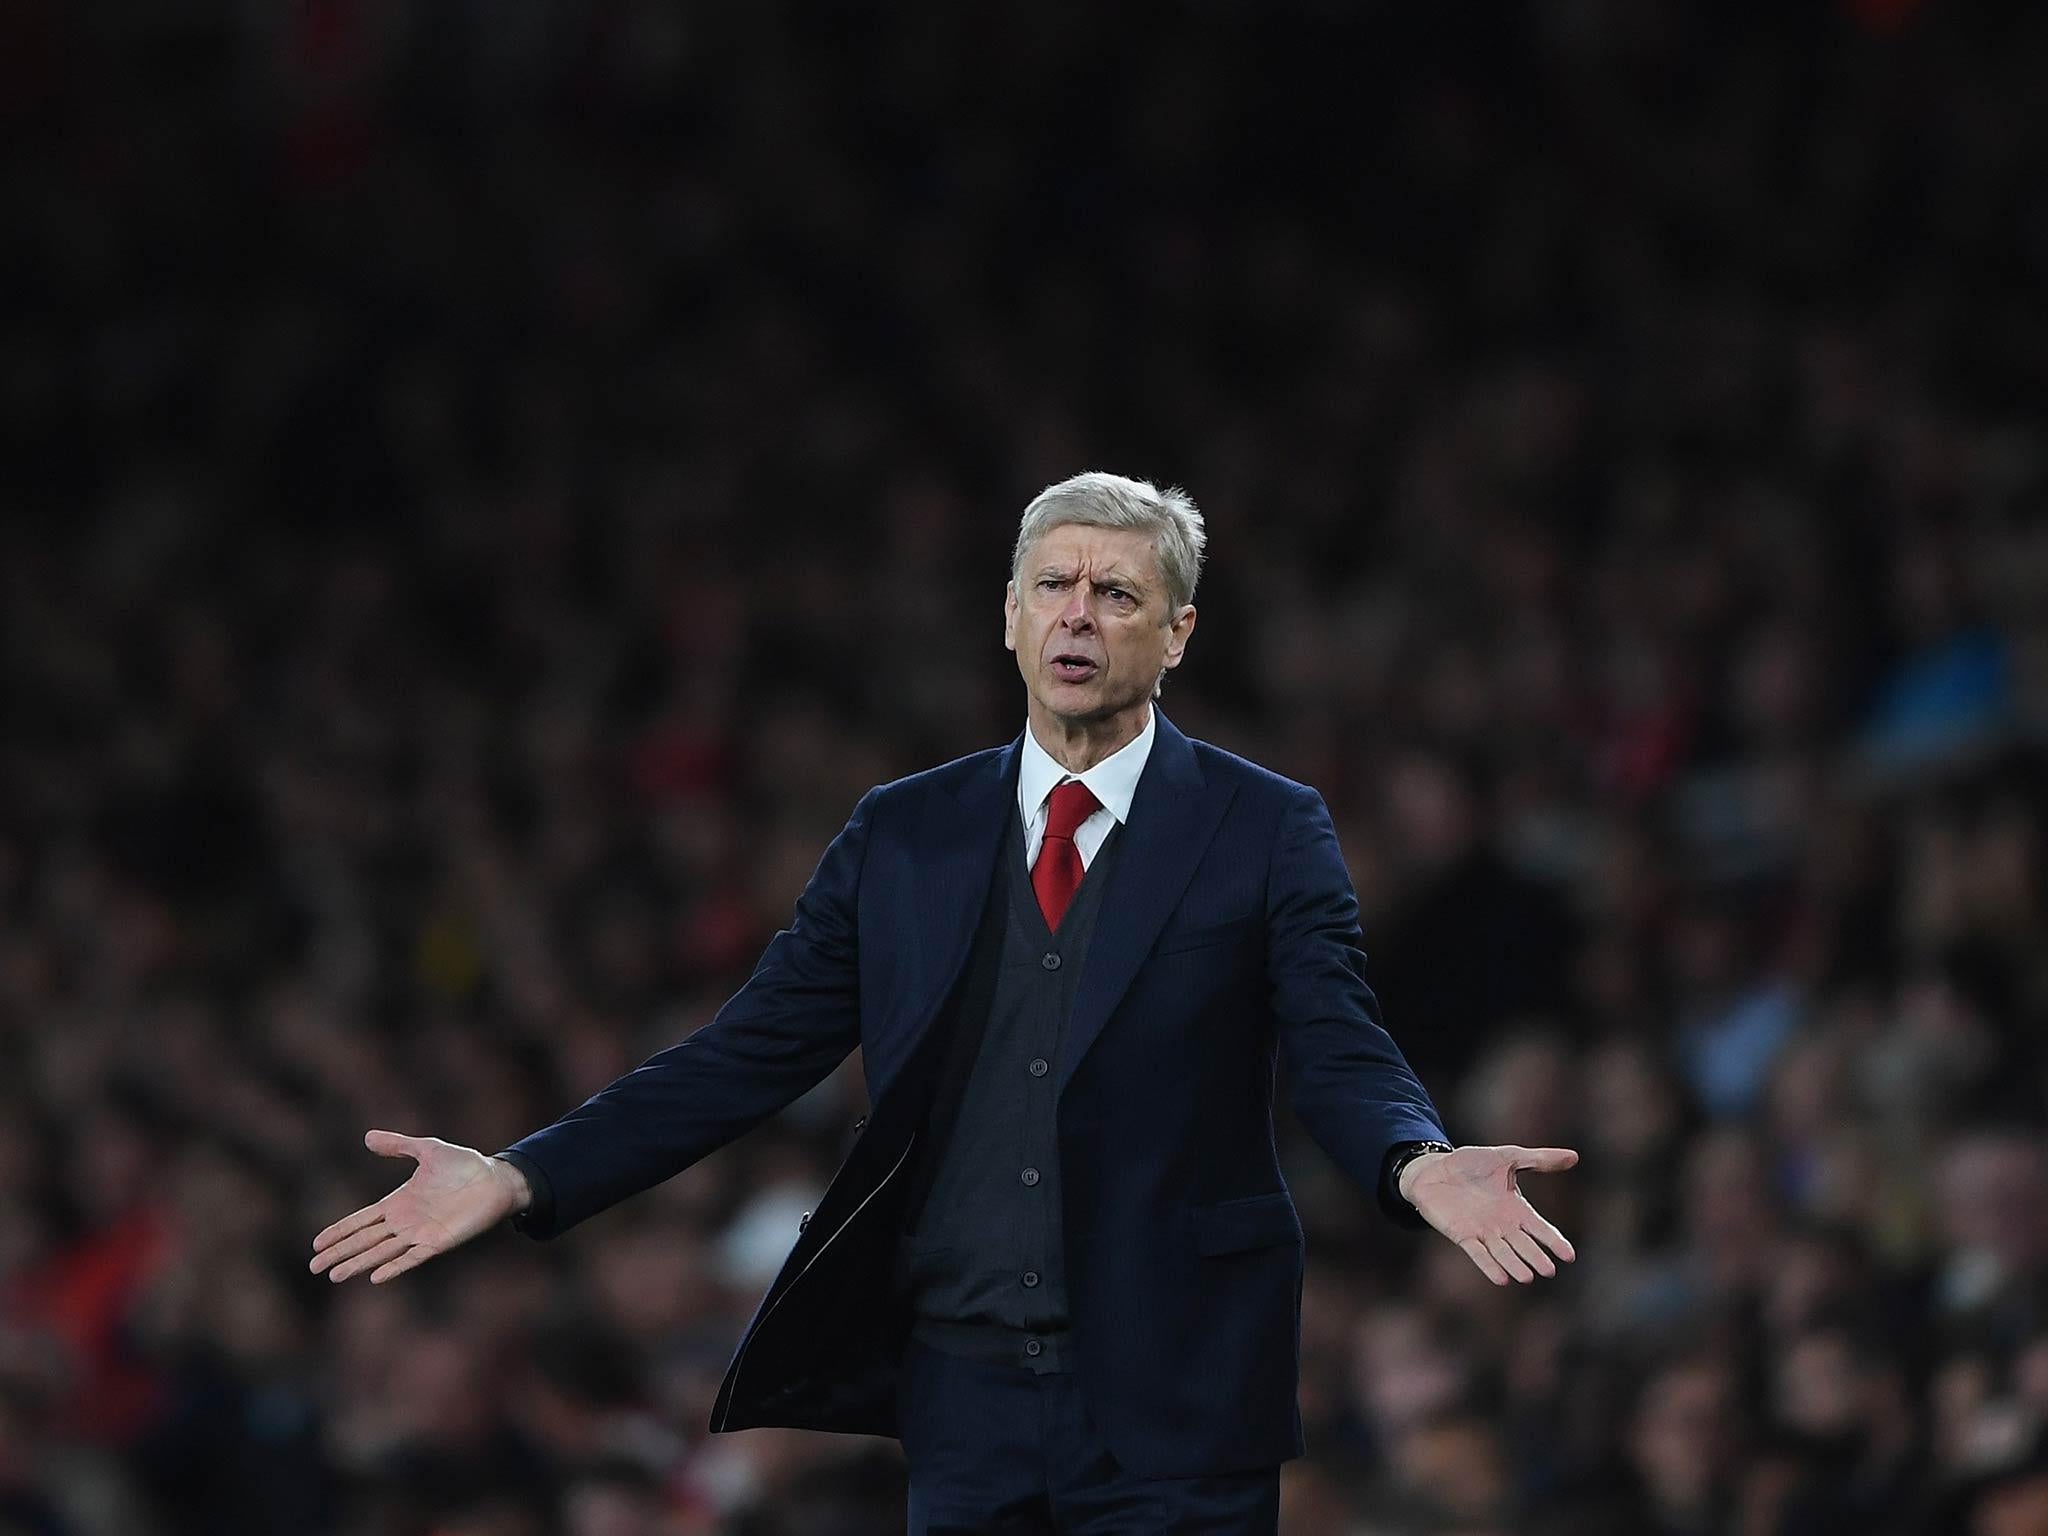 Wenger he will "see what the board thinks" at the end of the season. Getty